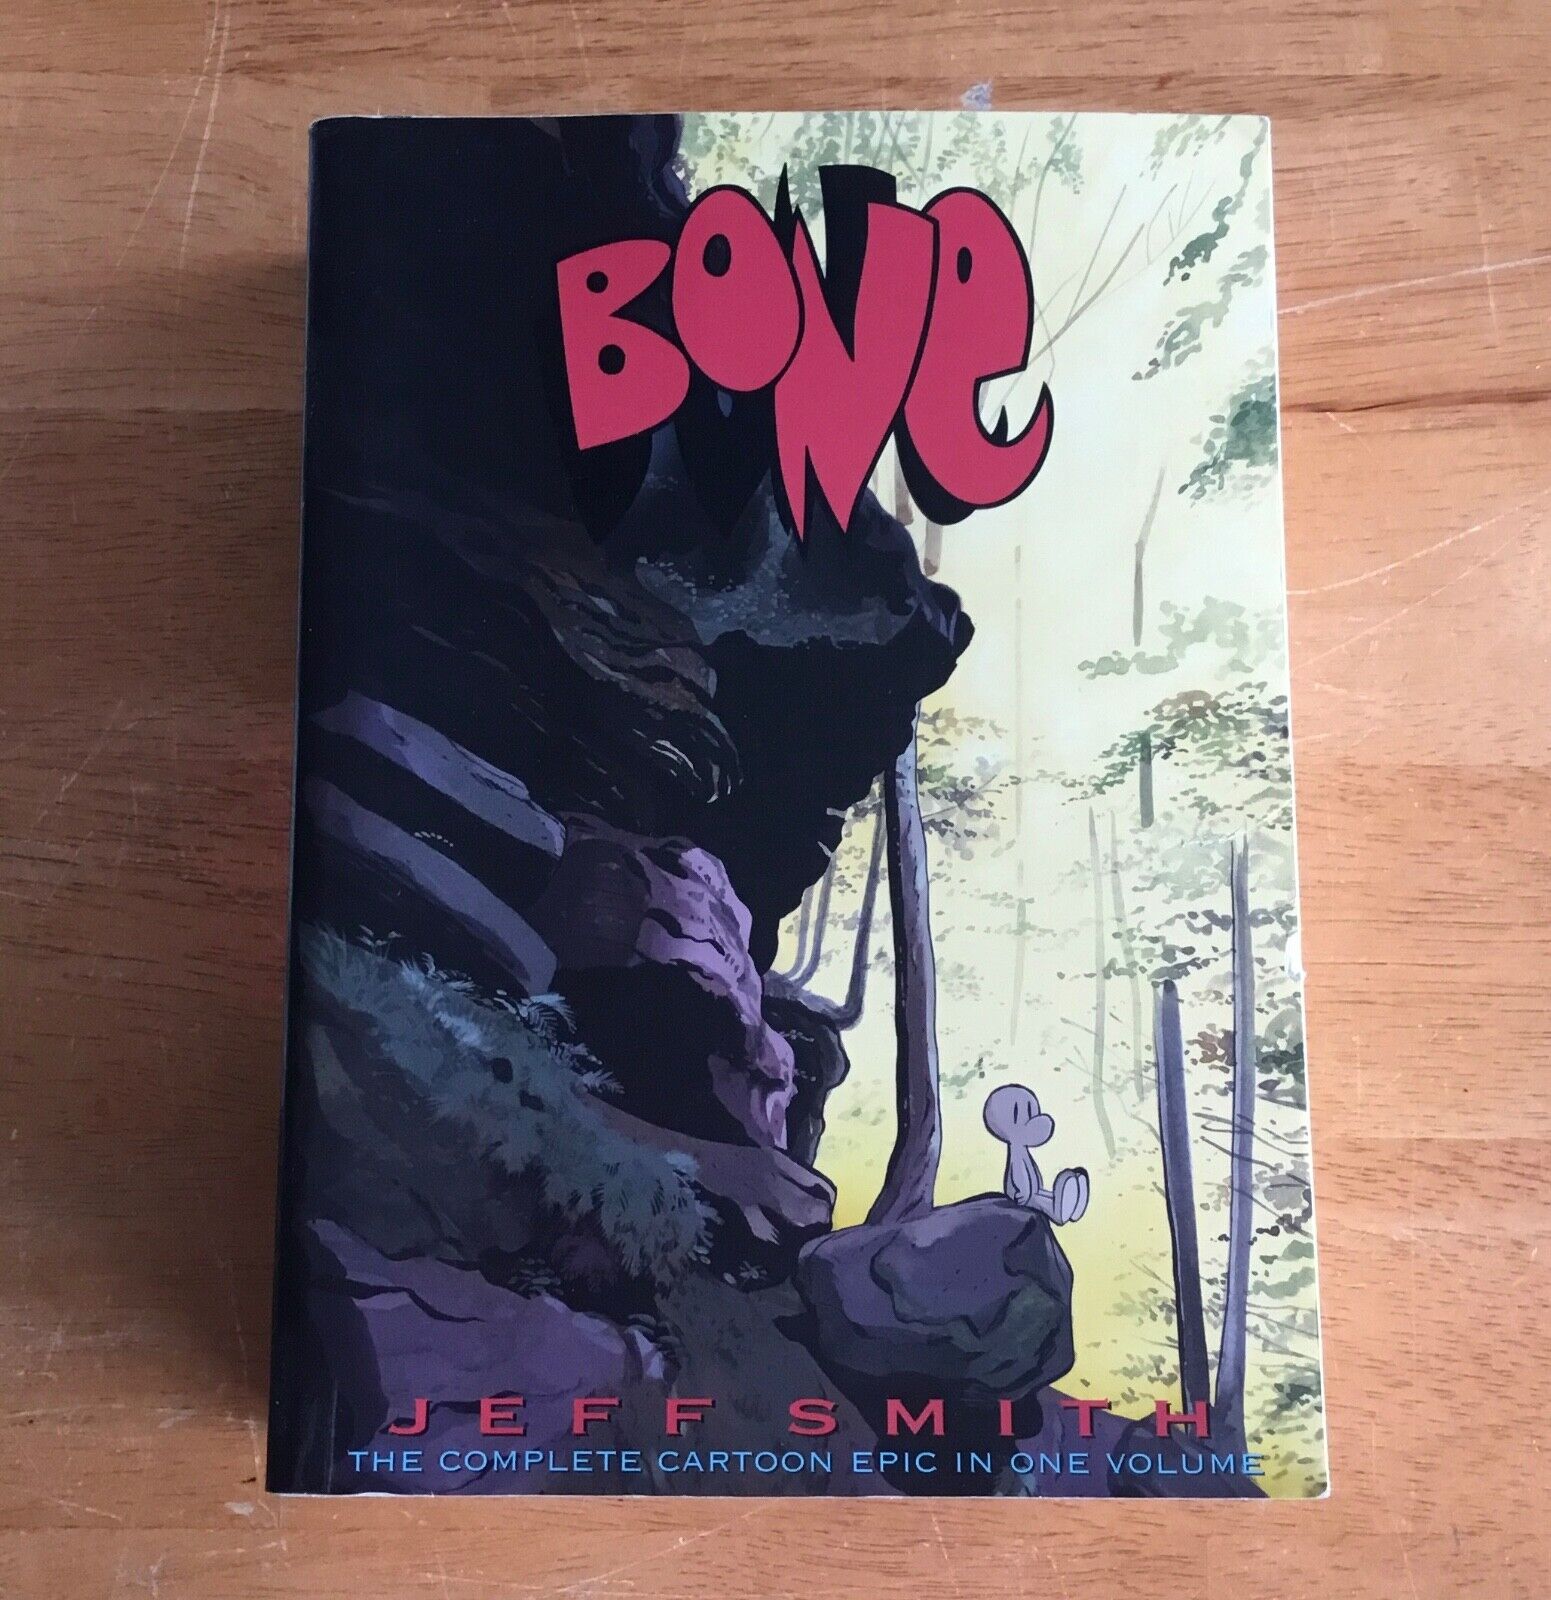 Bone By Jeff Smith The Complete Cartoon Epic in One Volume Soft Cover Book 2004